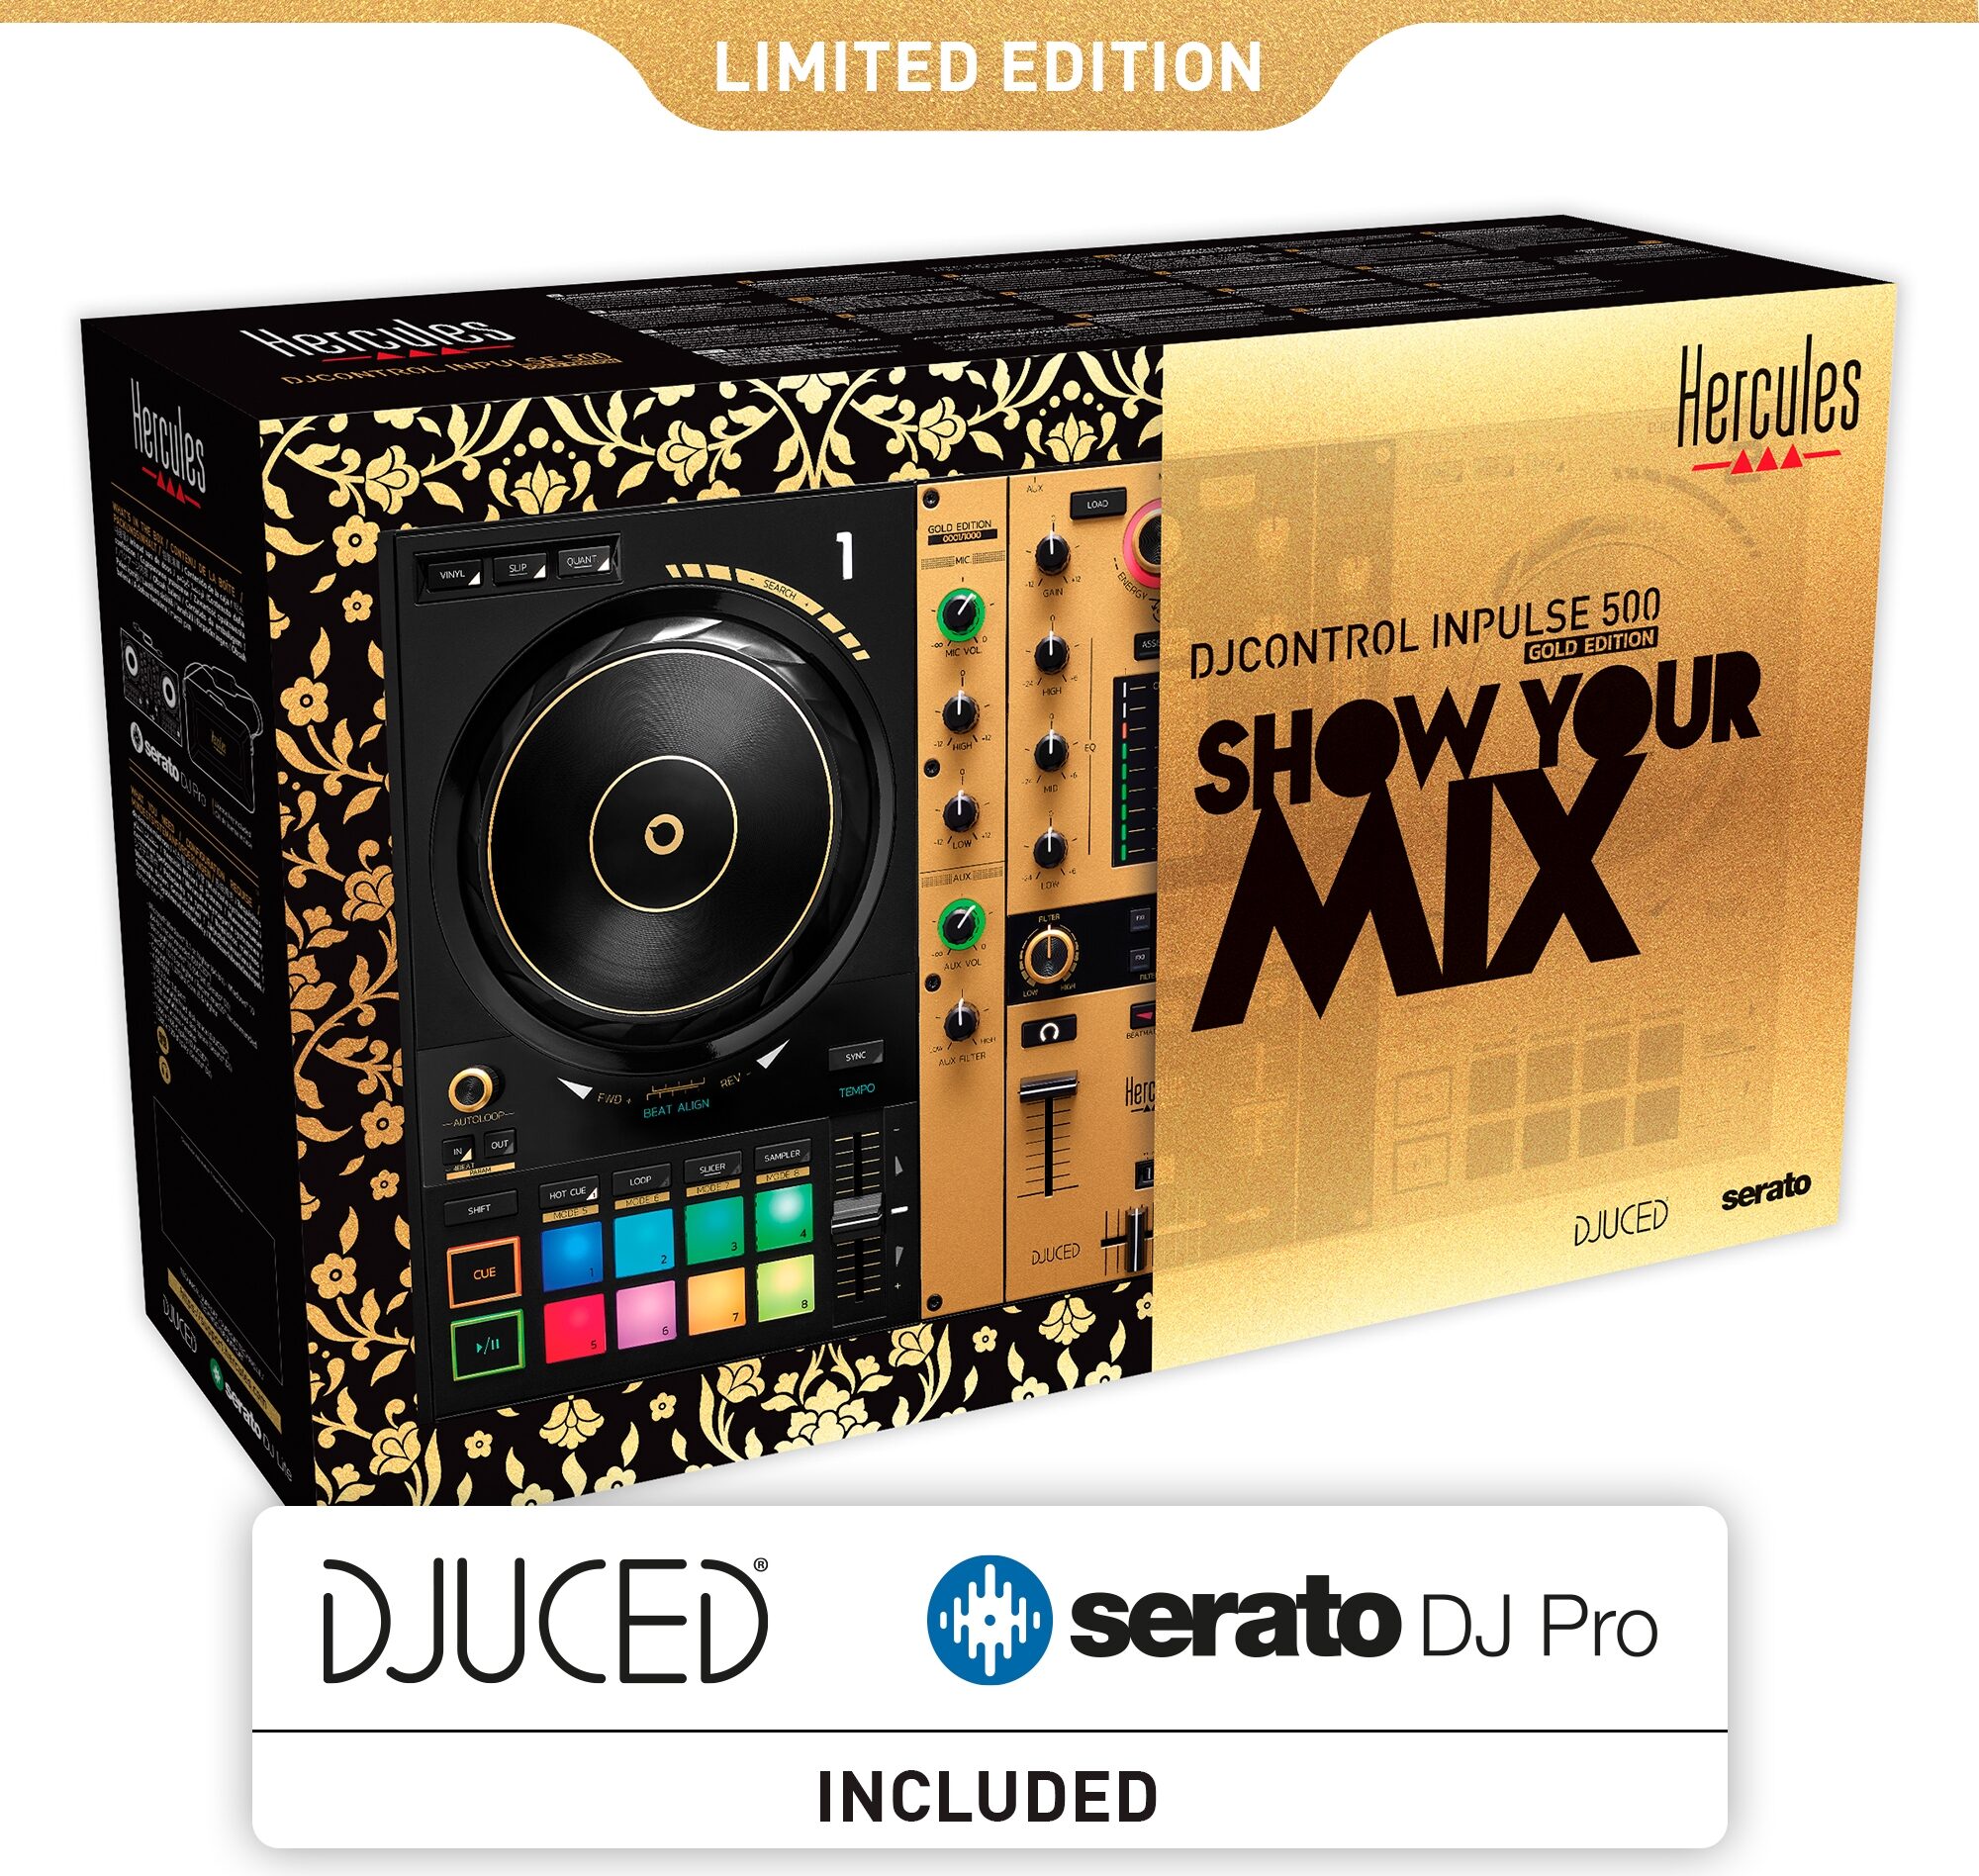 Hercules DJControl Inpulse 500 Gold Edition — Limited edition — 2-deck USB DJ controller for Serato DJ Pro and DJUCED